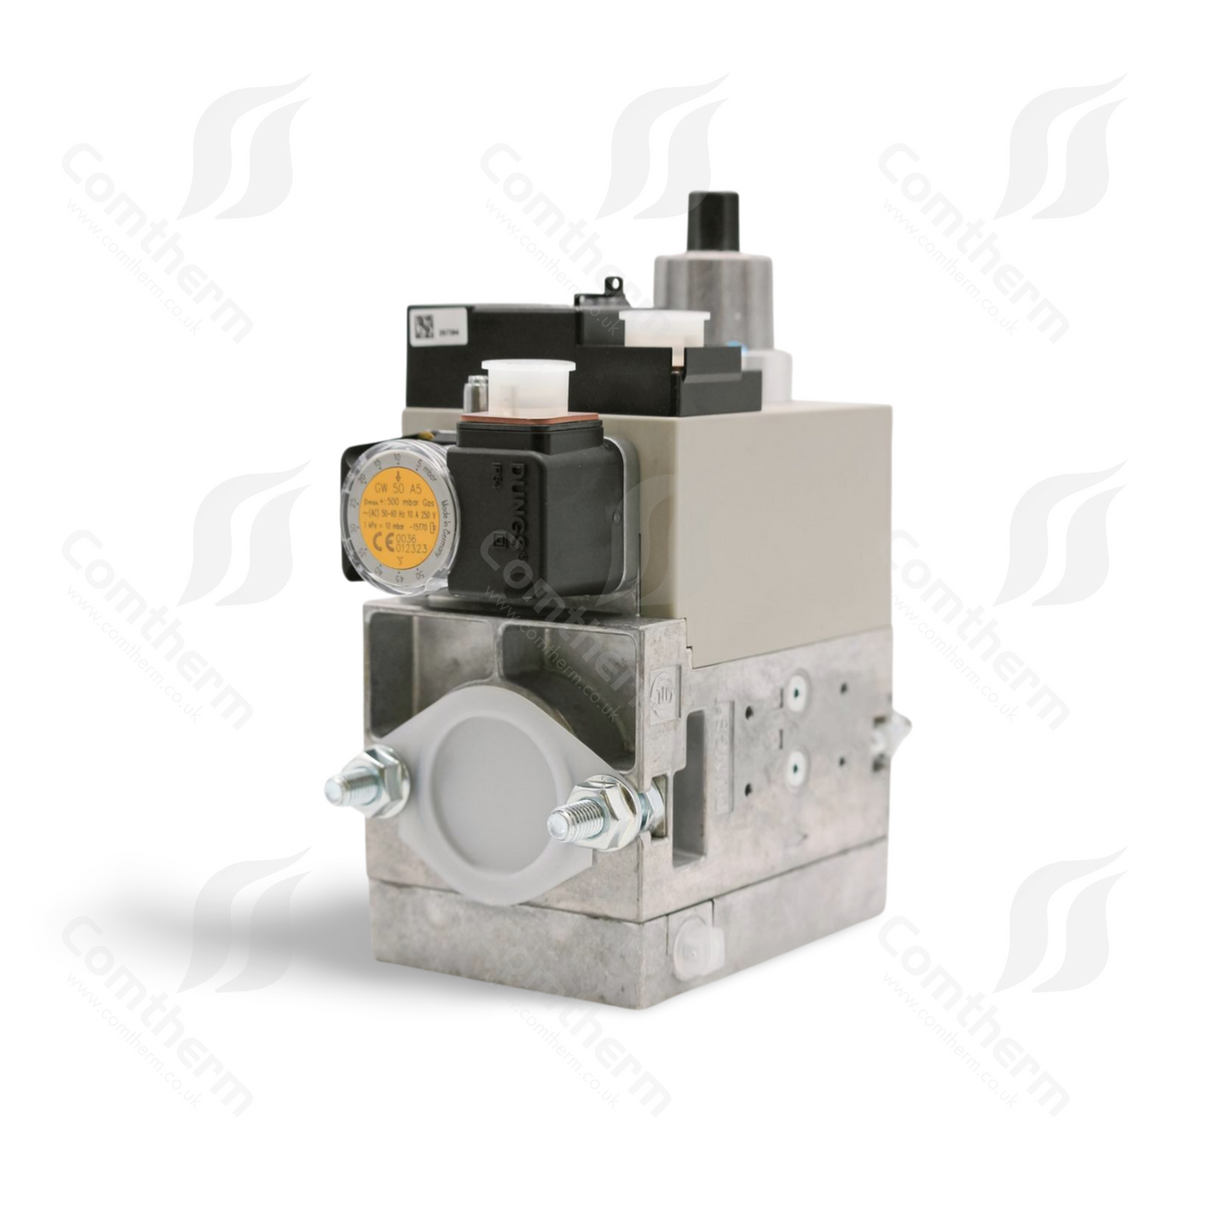 Dungs MB-DLE 410 B01 S50 + GW150A5 Multibloc Gas Valve - 230v